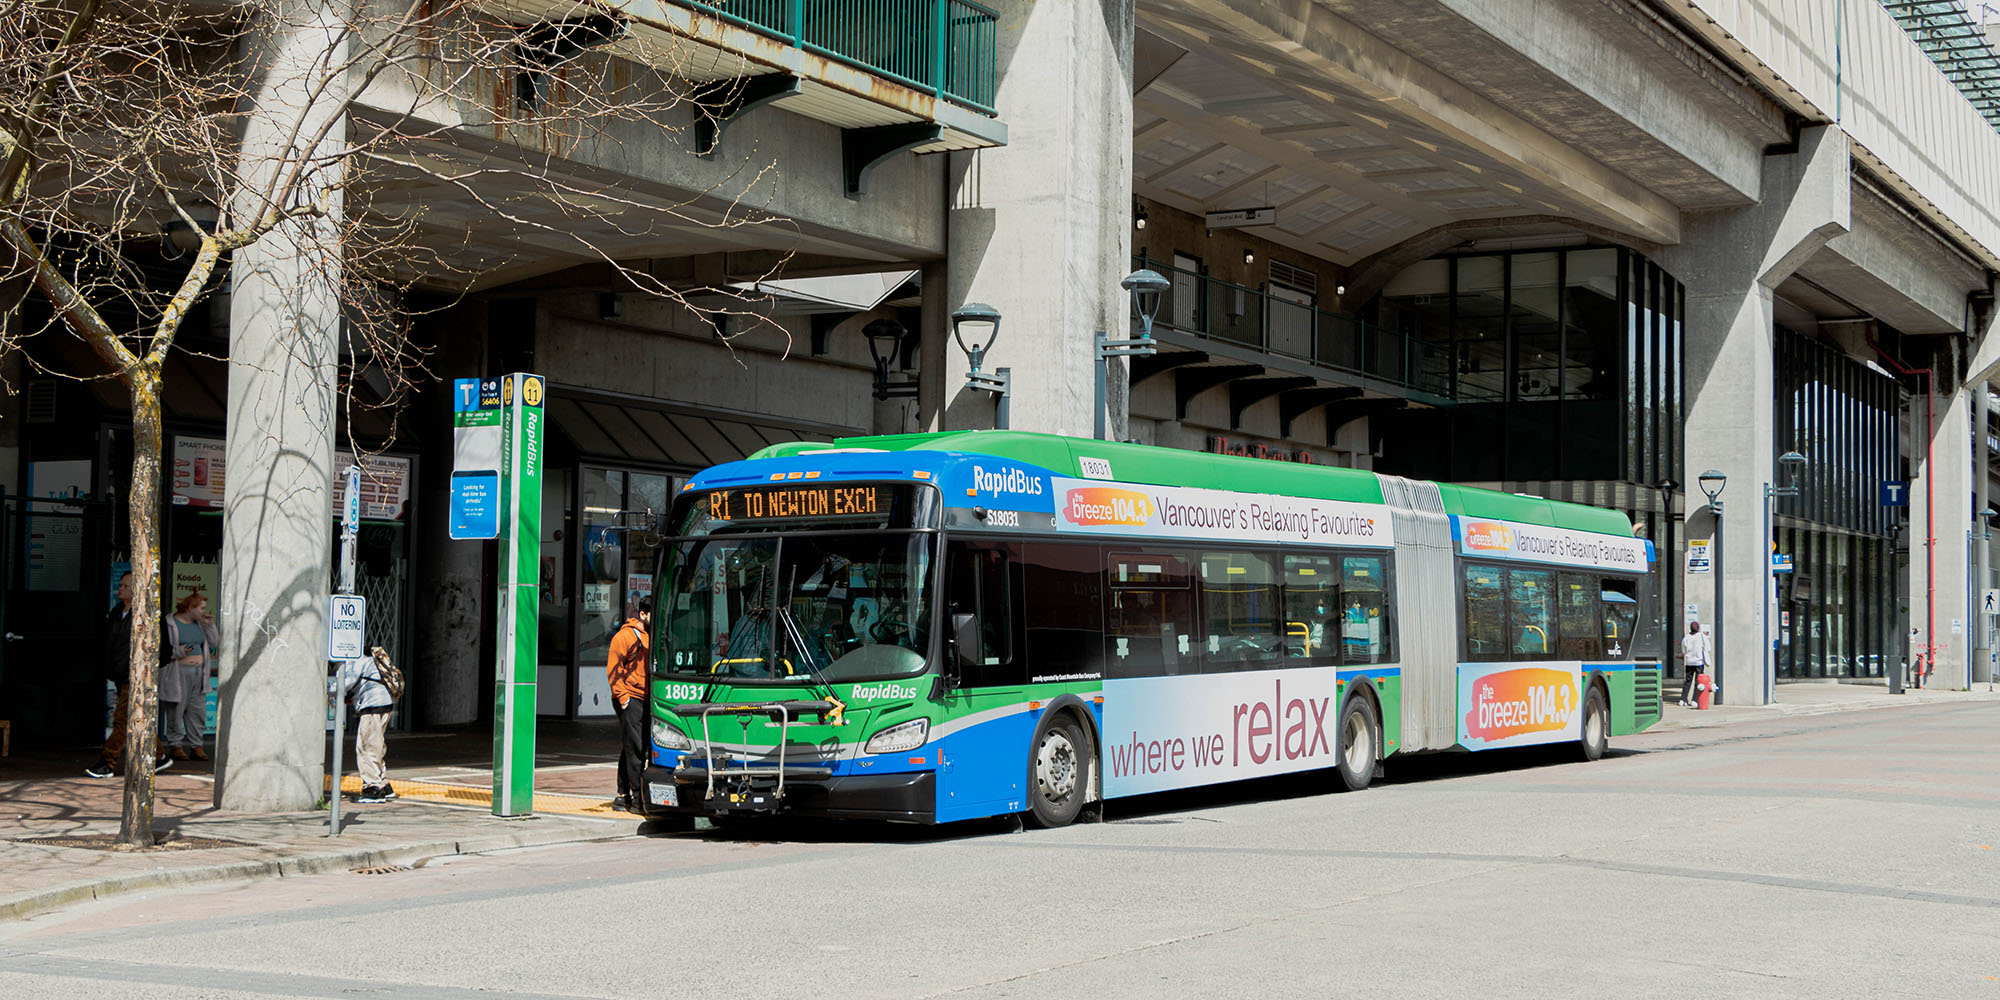 The R1 King George Blvd RapidBus picking up passengers at Surrey Central Station